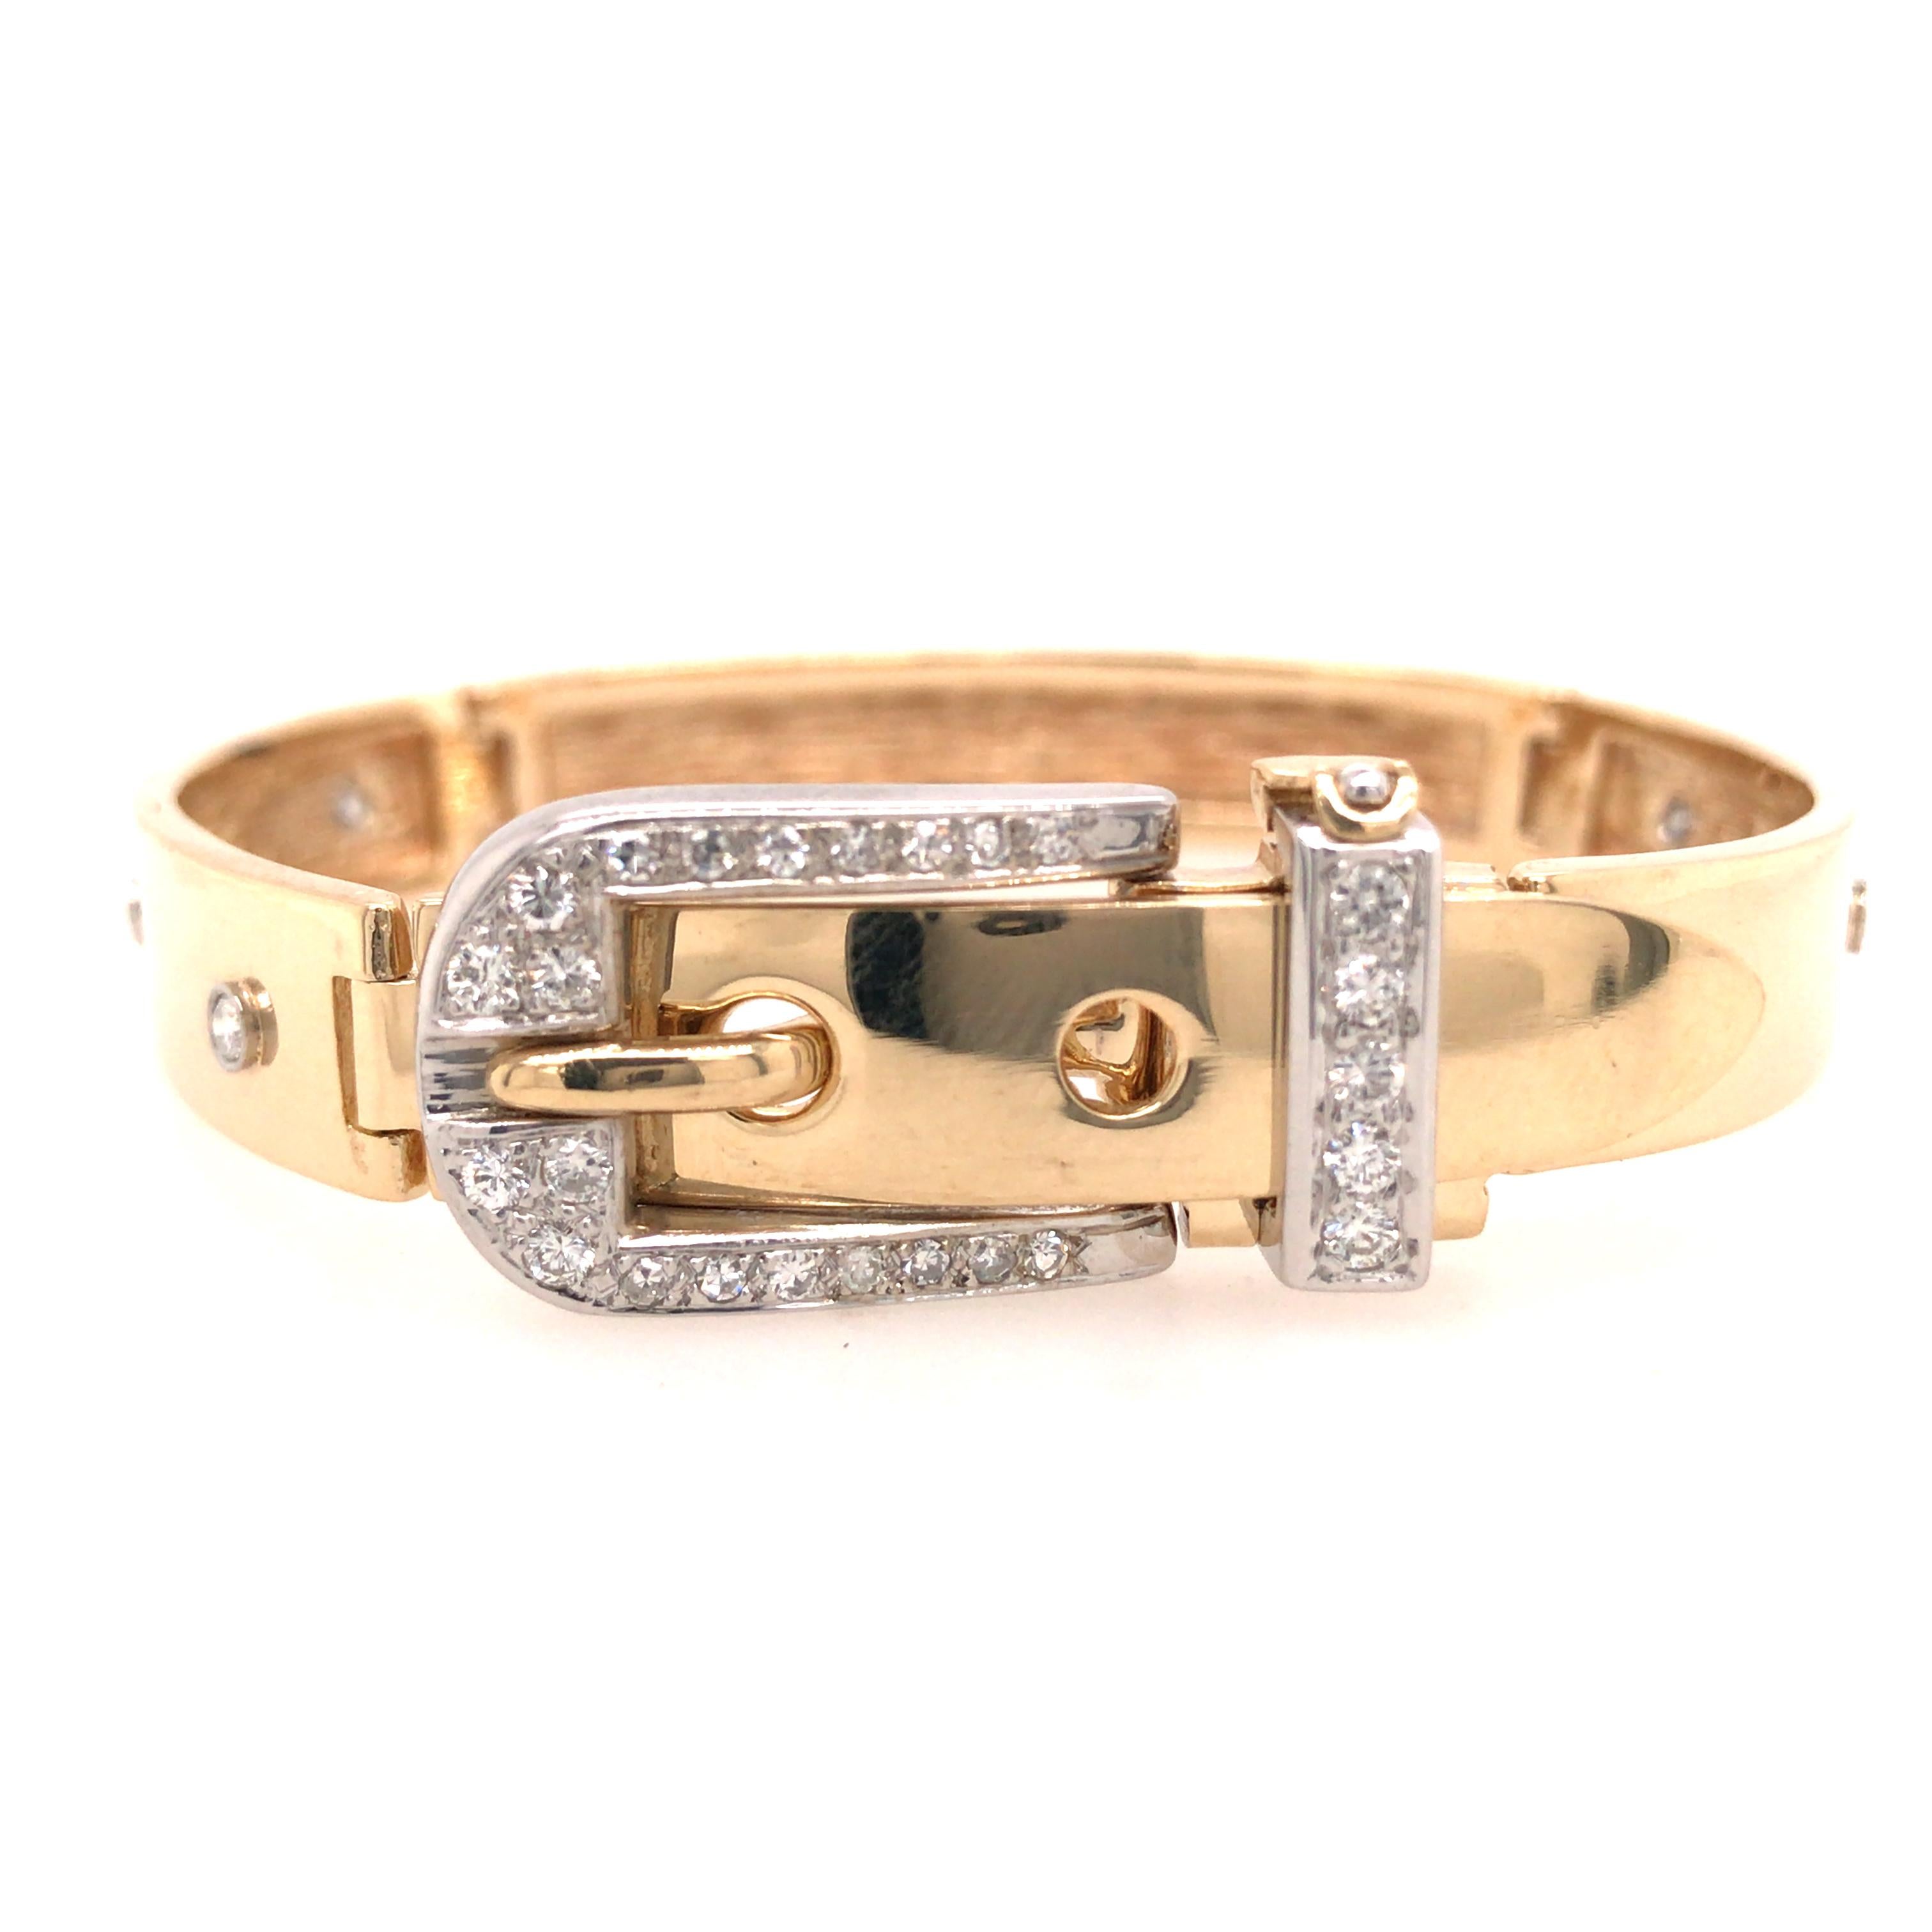 Hammerman Brothers Diamond Buckle Bracelet in 14K Yellow Gold.  Round Brilliant Cut Diamonds weighing 1.03 carat total weight, F-G in color and VS1-VS2 are expertly set.  The Bracelet is adjustable in length from 6 1/2 inch to 6 3/4 inch and